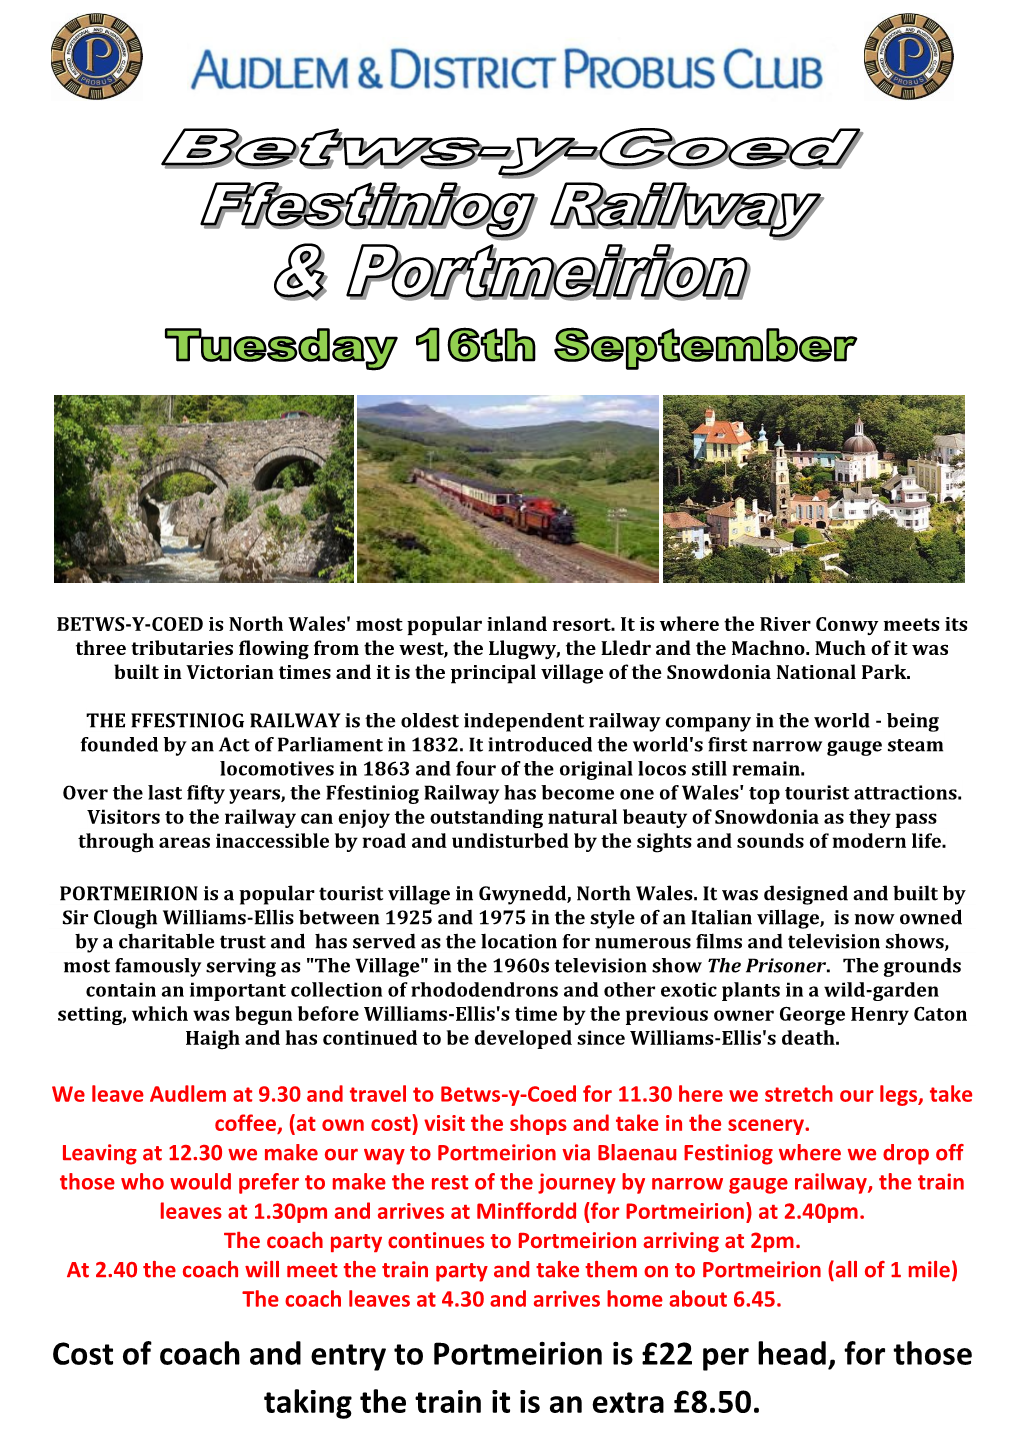 Cost of Coach and Entry to Portmeirion Is £22 Per Head, for Those Taking the Train It Is an Extra £8.50